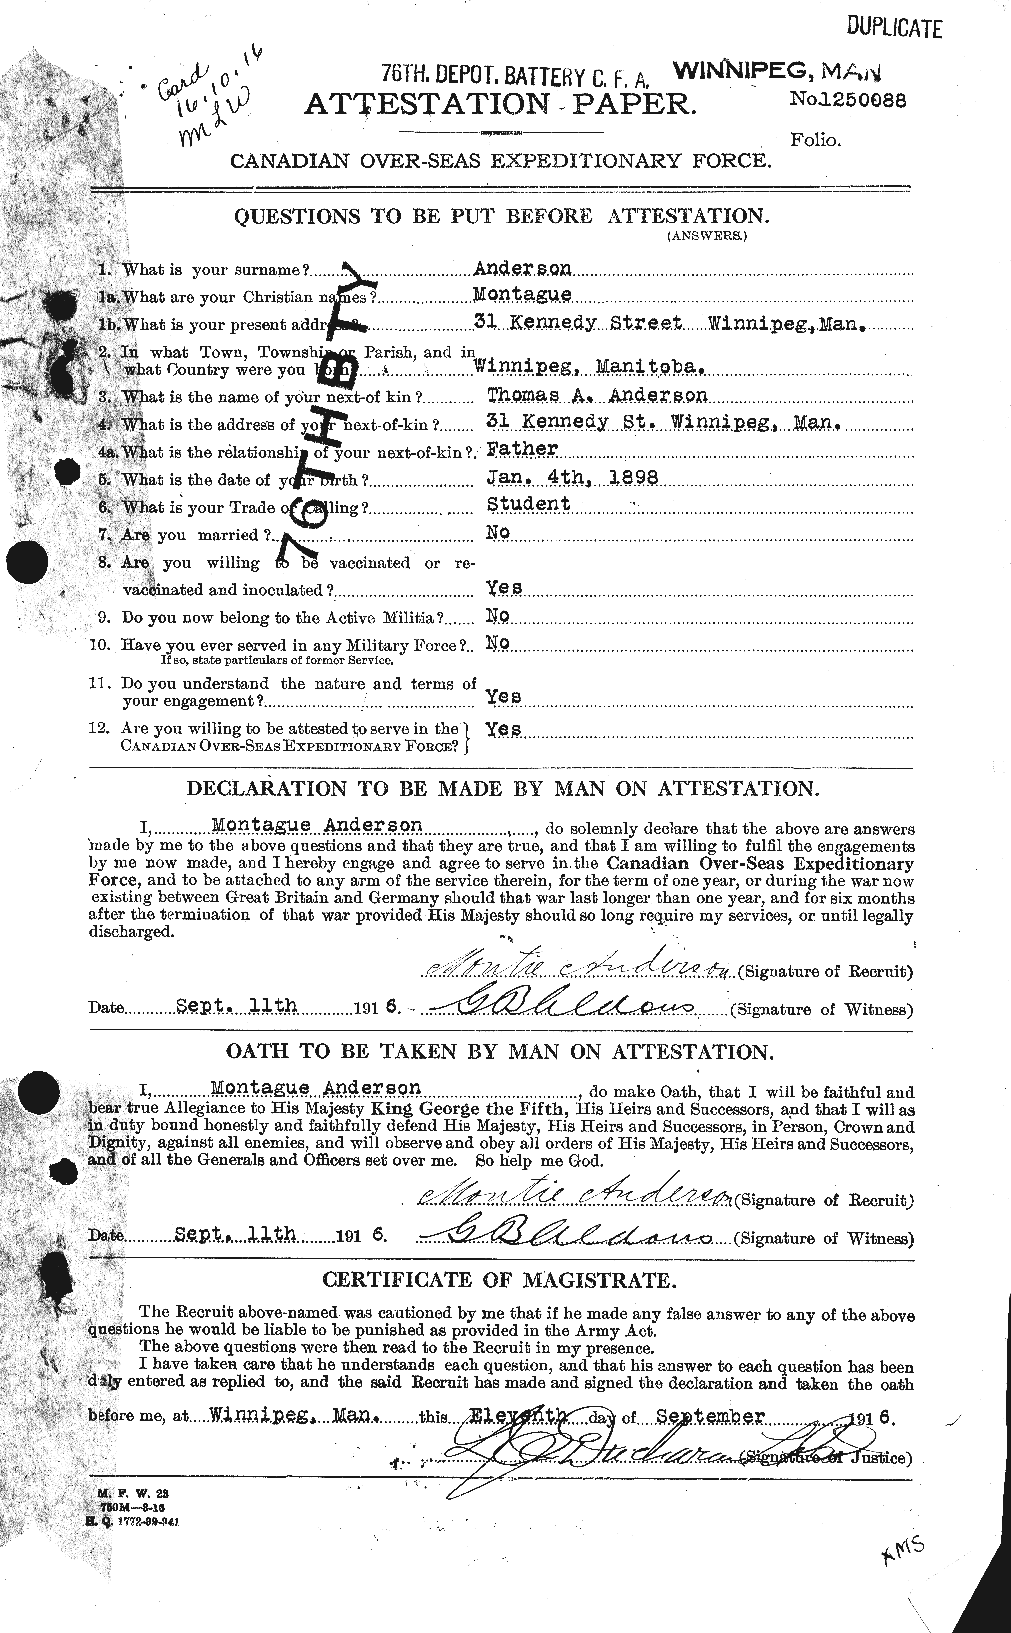 Personnel Records of the First World War - CEF 207448a